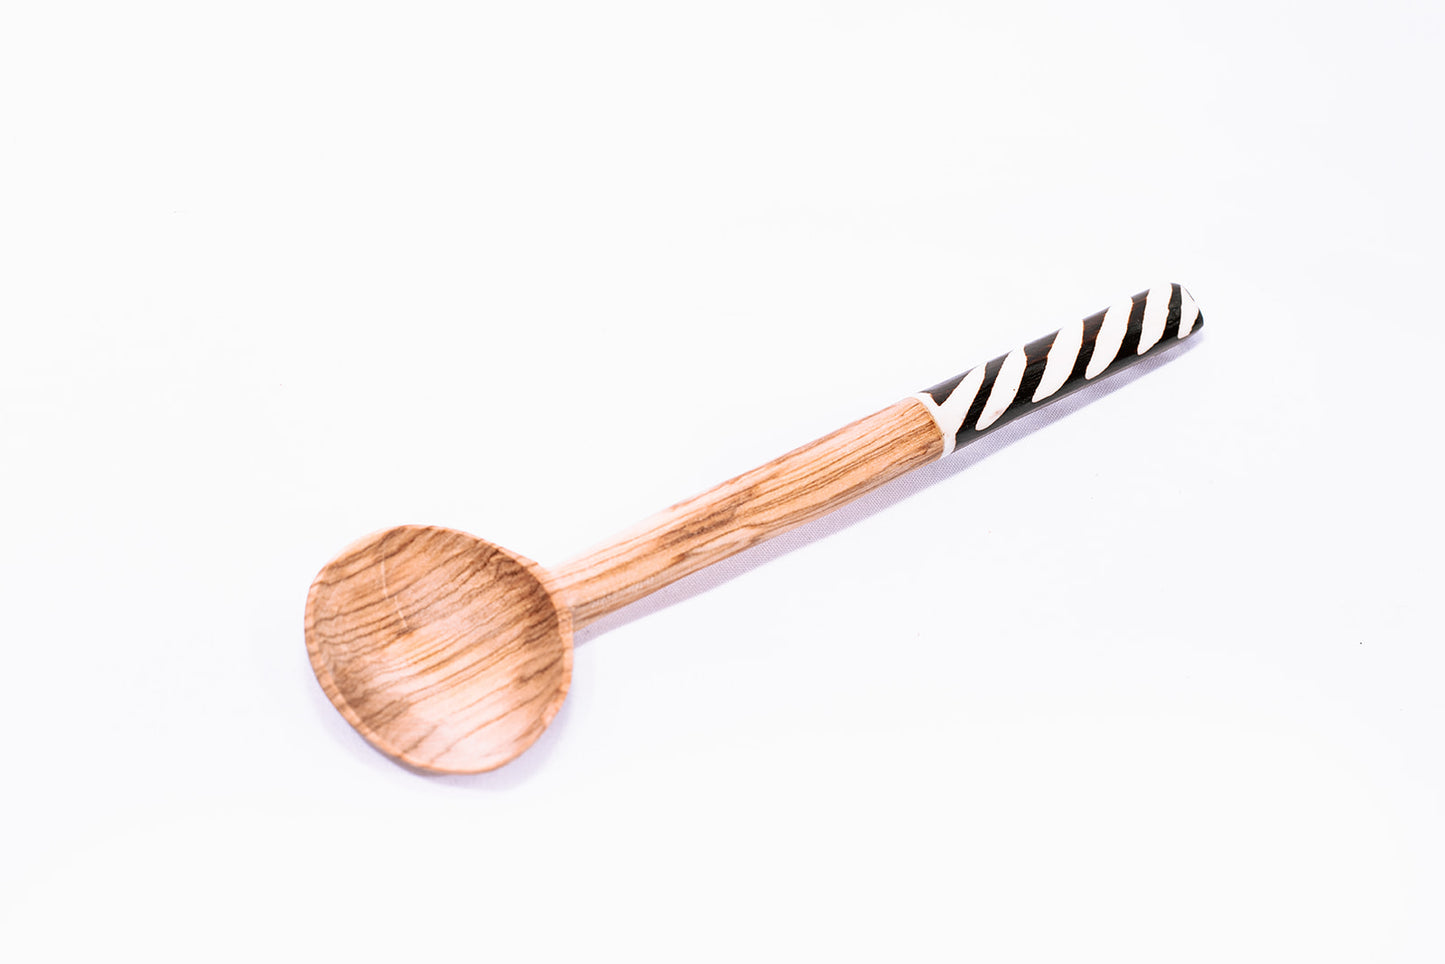 Small Wooden Spoon